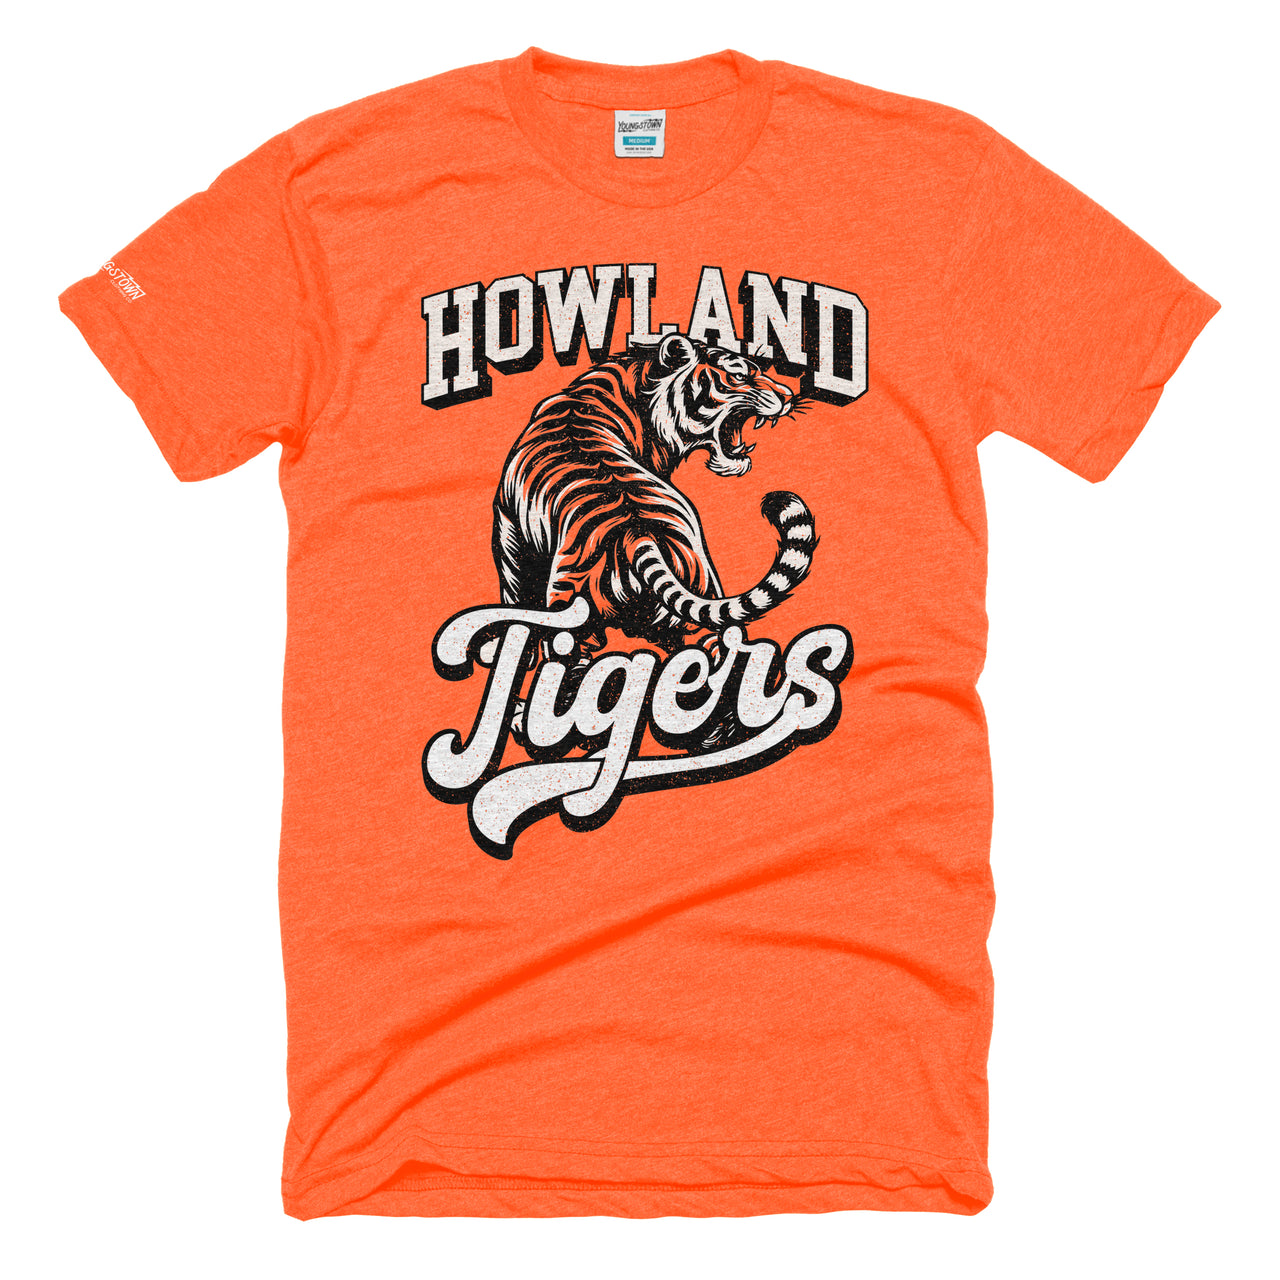 Howland Tigers